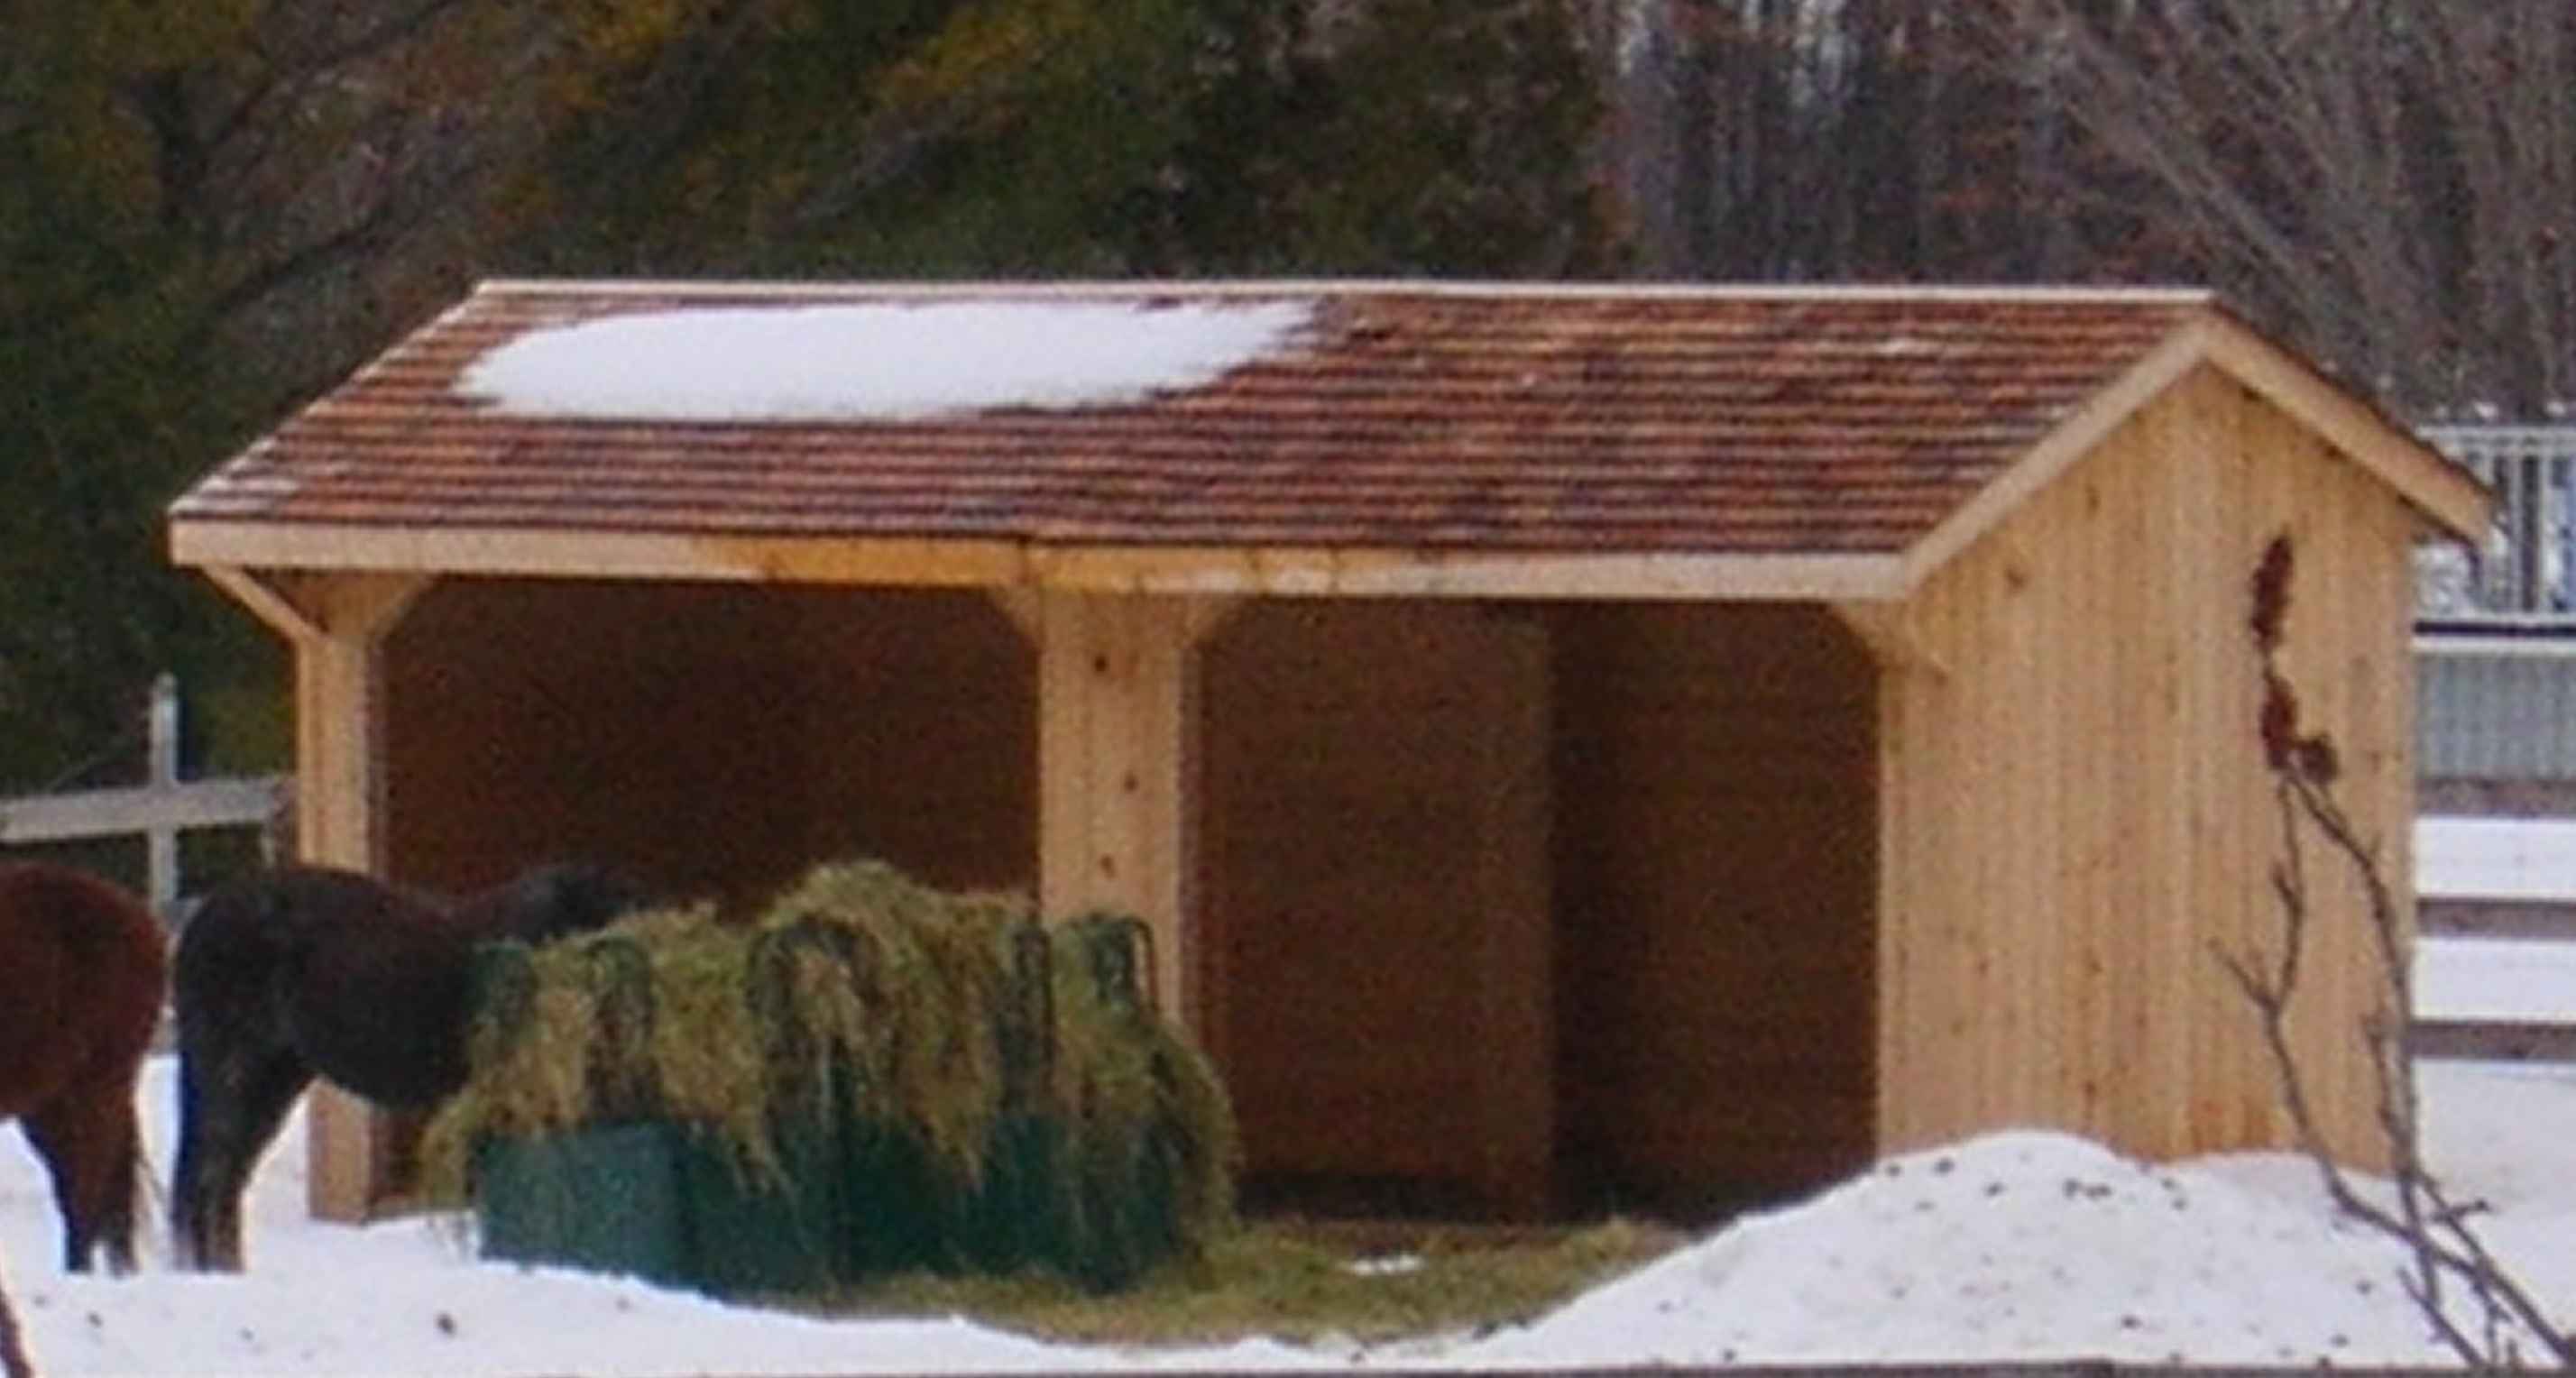 Horse Run-in Shed Plans How to Build DIY Blueprints pdf ...